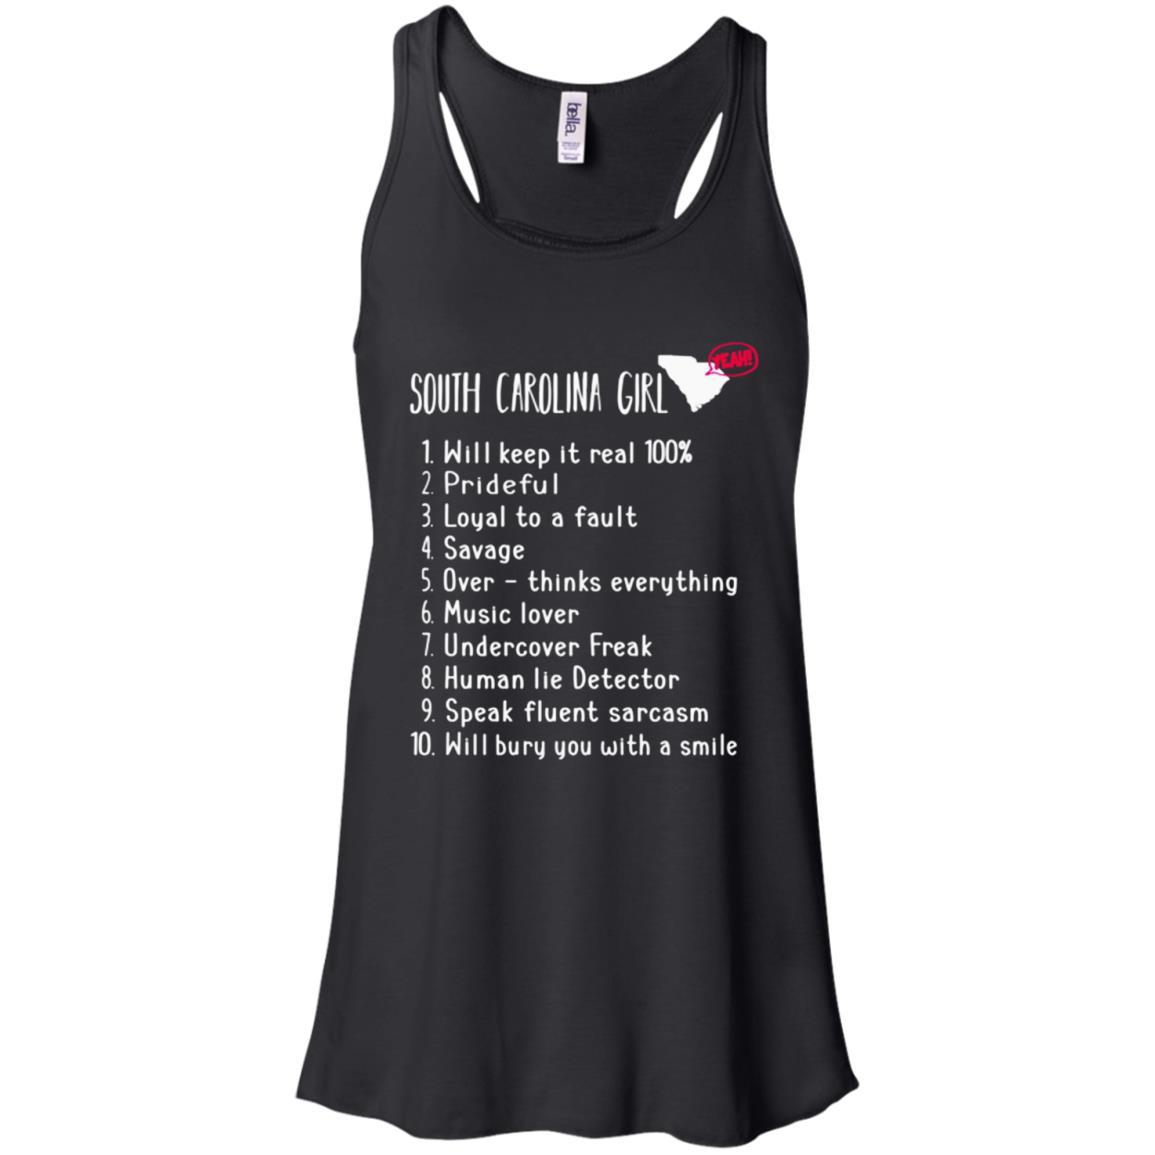 South Carolina Girl Will Keep It Real What She Can Do Racerback Tank Shirts